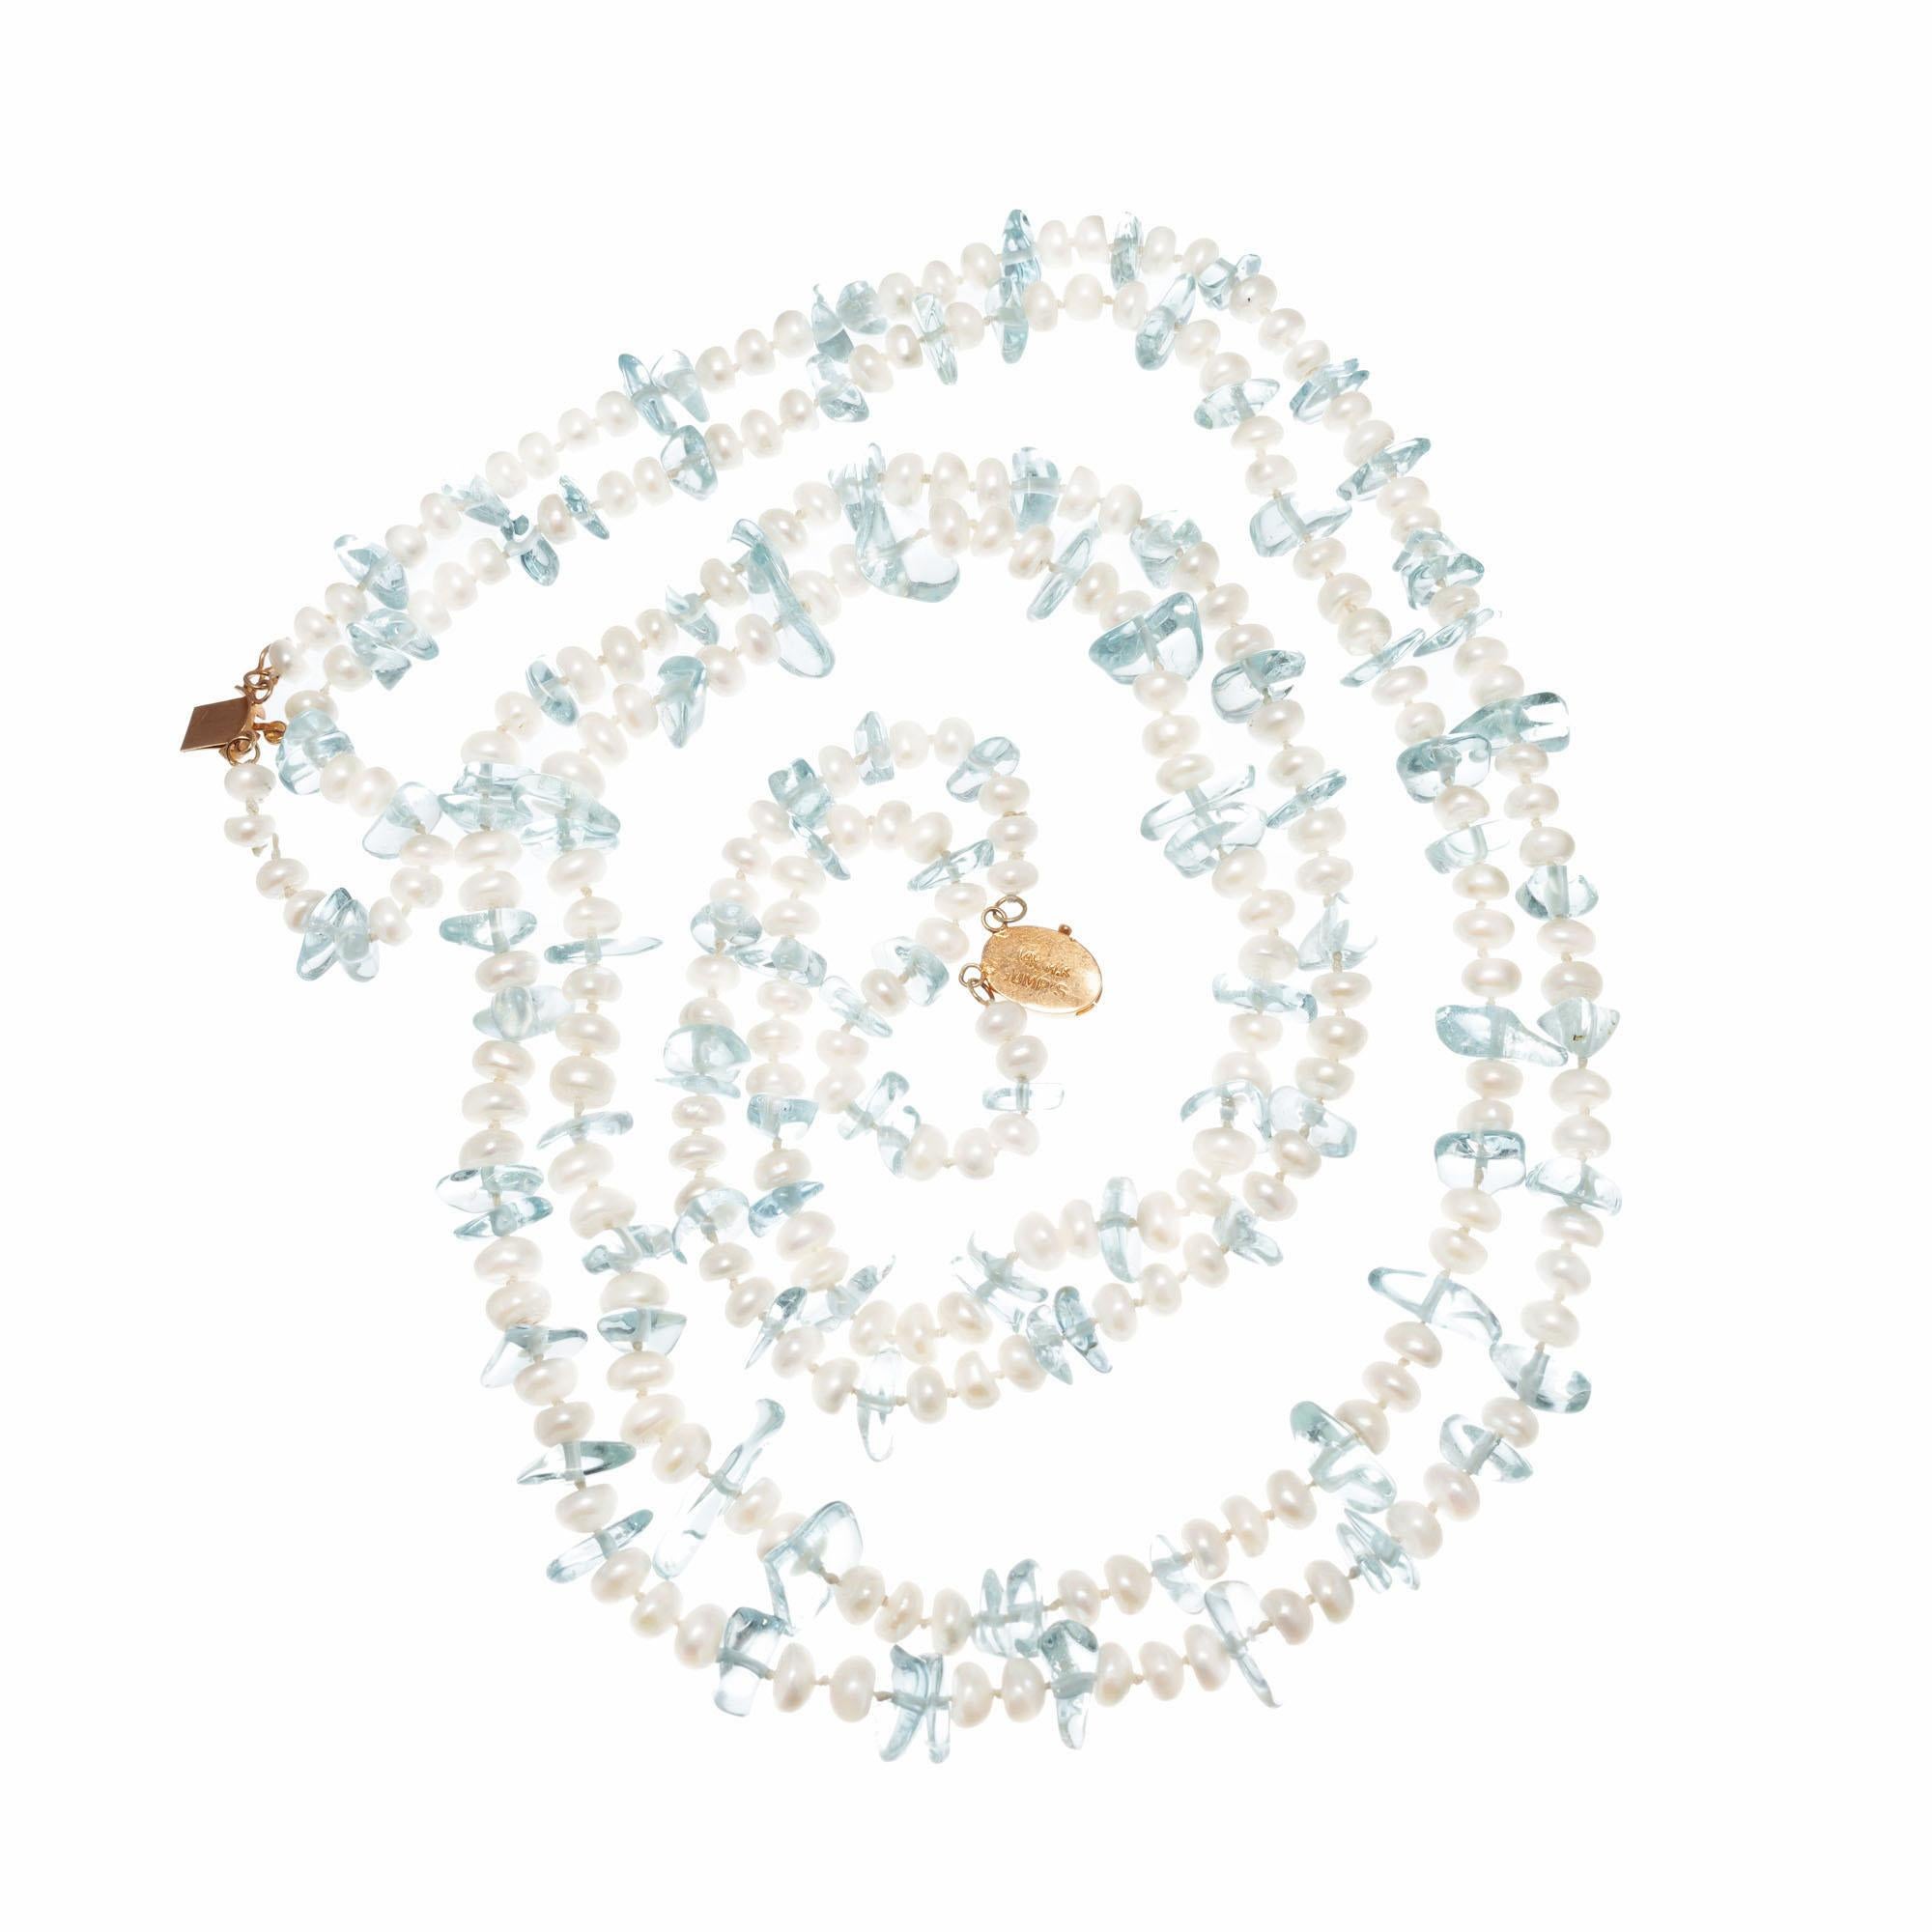 Gumps Aquamarine bead and freshwater pearl two strand necklace at 26 and 27 inches. Can be worn with the catch in the middle as a 53 inch long necklace as well.

118 genuine Aqua beads, 8 x 3 to 12 x 5mm natural tumbled, approx. total weight